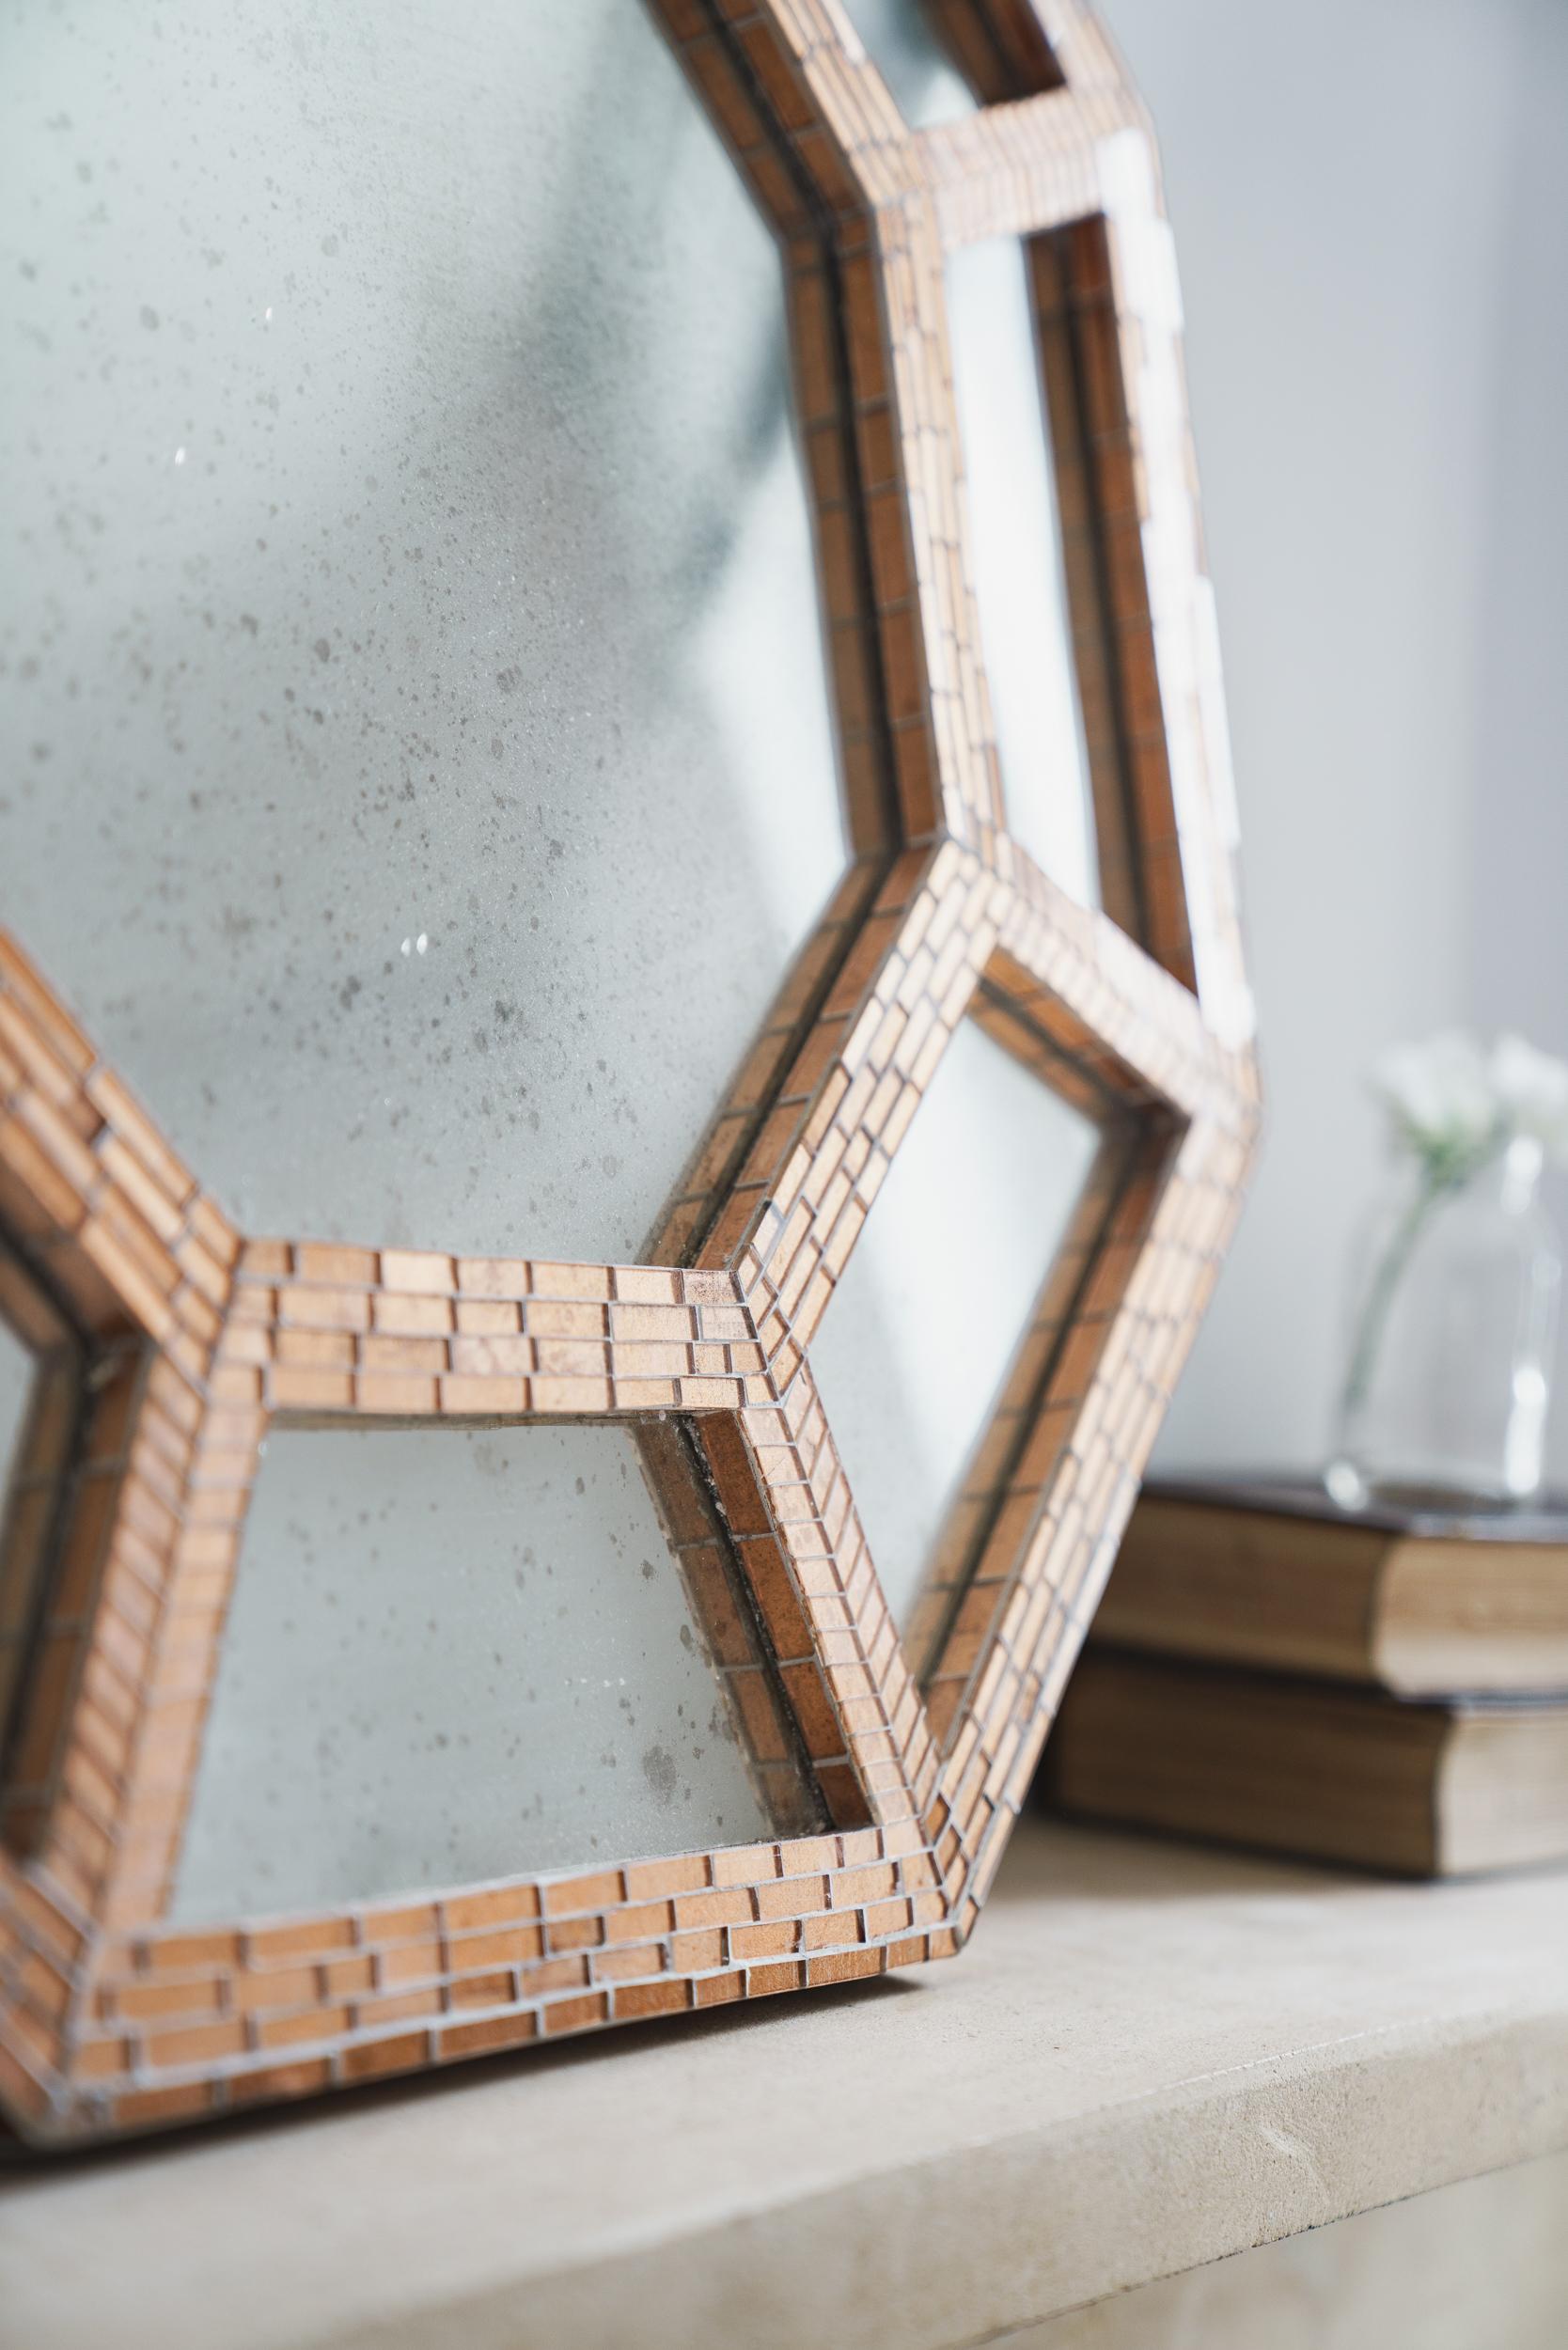 Octagonal Ventana Mosaic mirror hand made in UK by Claire Nayman. This contemporary classic margin mirror in copper leaf hand gilded glass. Each tiny mosaic tesserae is hand cut with an exemplary eye for detail. It can also be made in mirror, 23.5